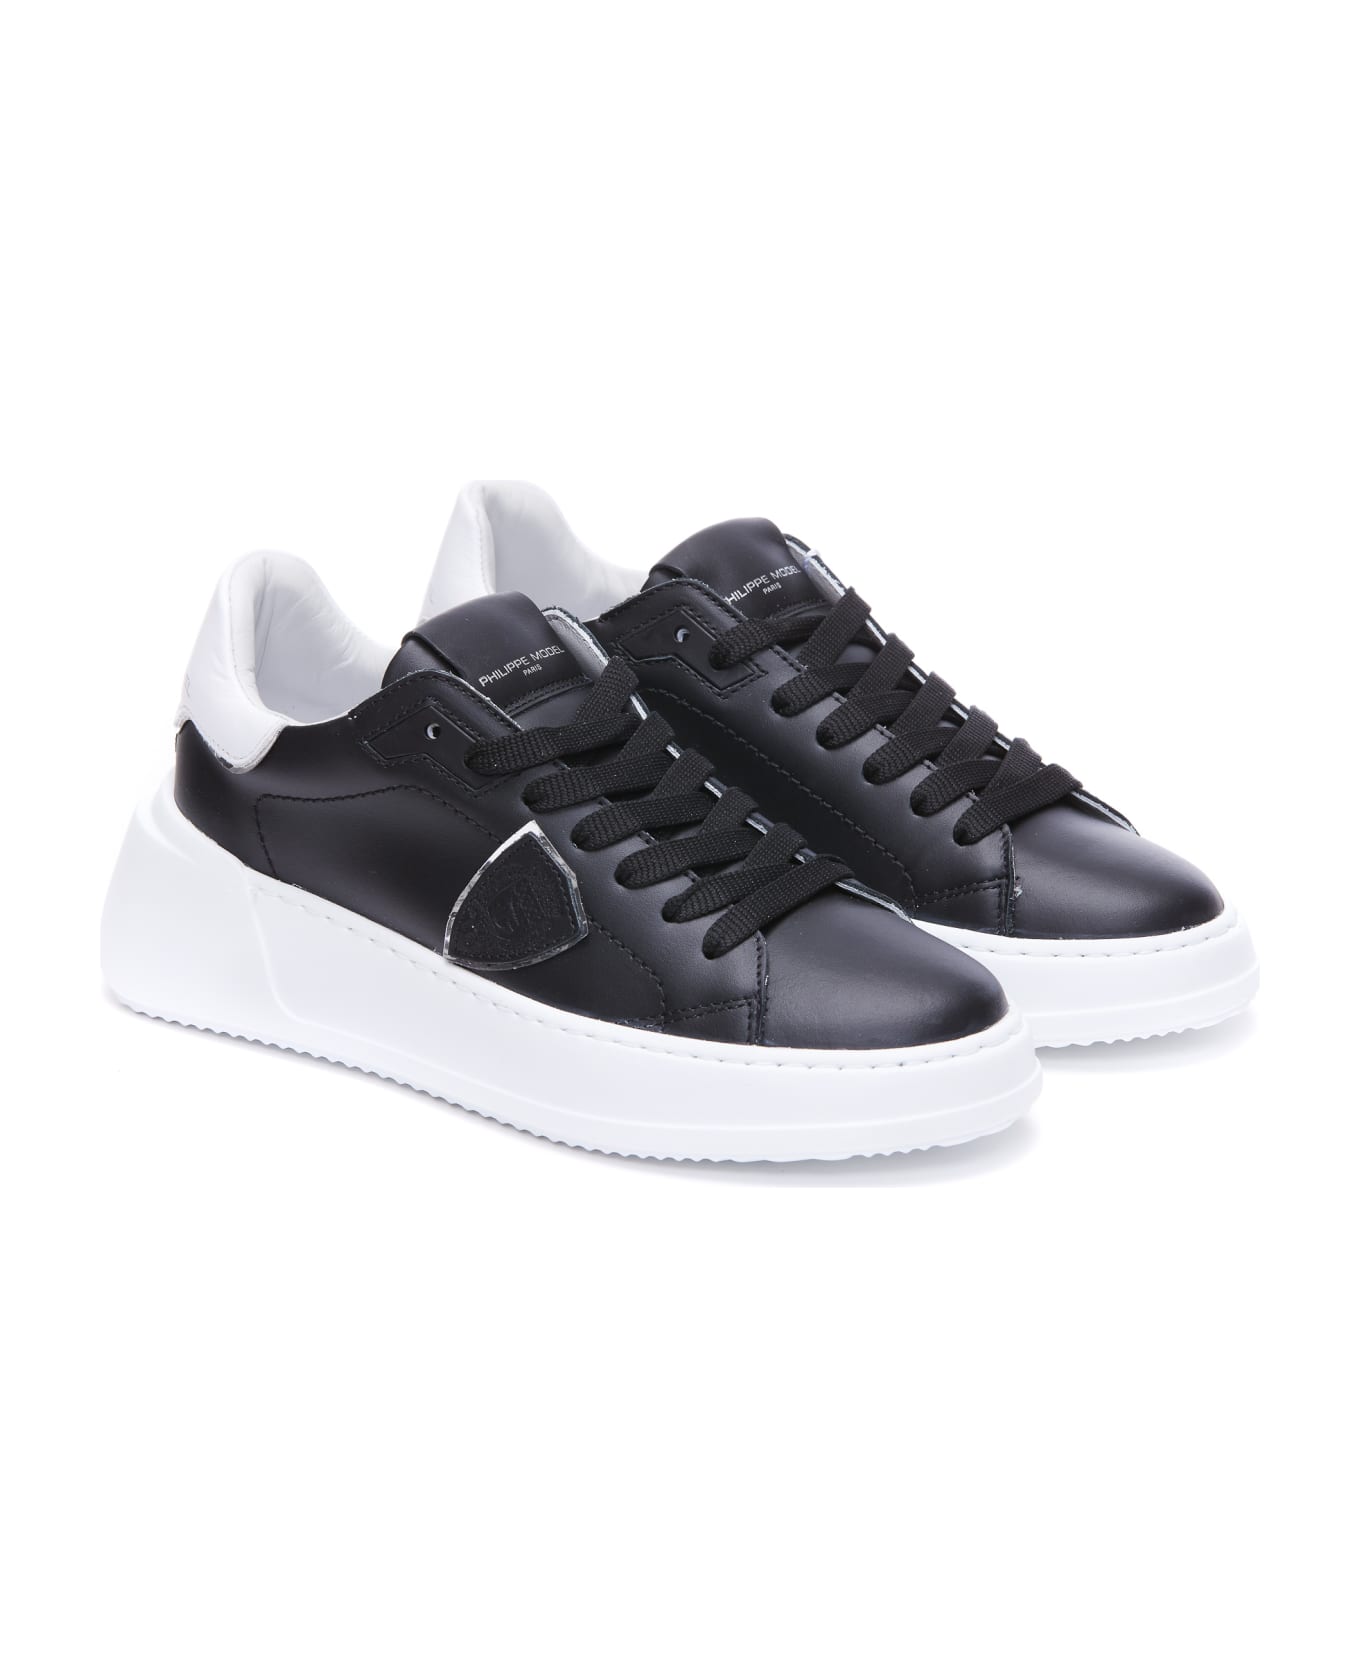 Philippe Model Tres Temple Low Sneakers - Black